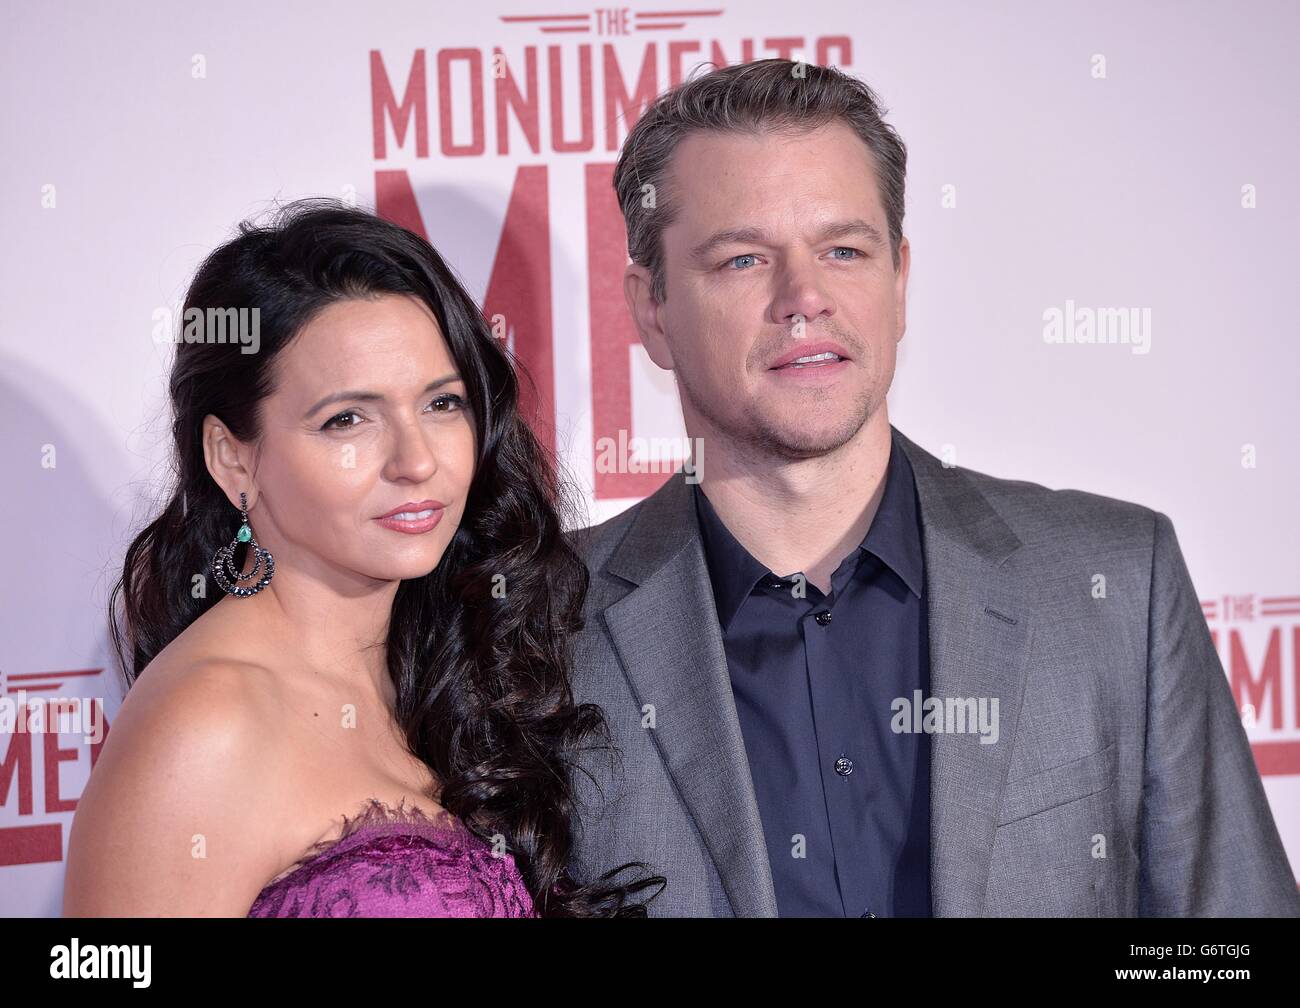 Matt Damon and wife Luciana Barroso arriving for the UK Premiere of The Monuments Men, at the Odeon Leicester Square, London. Stock Photo